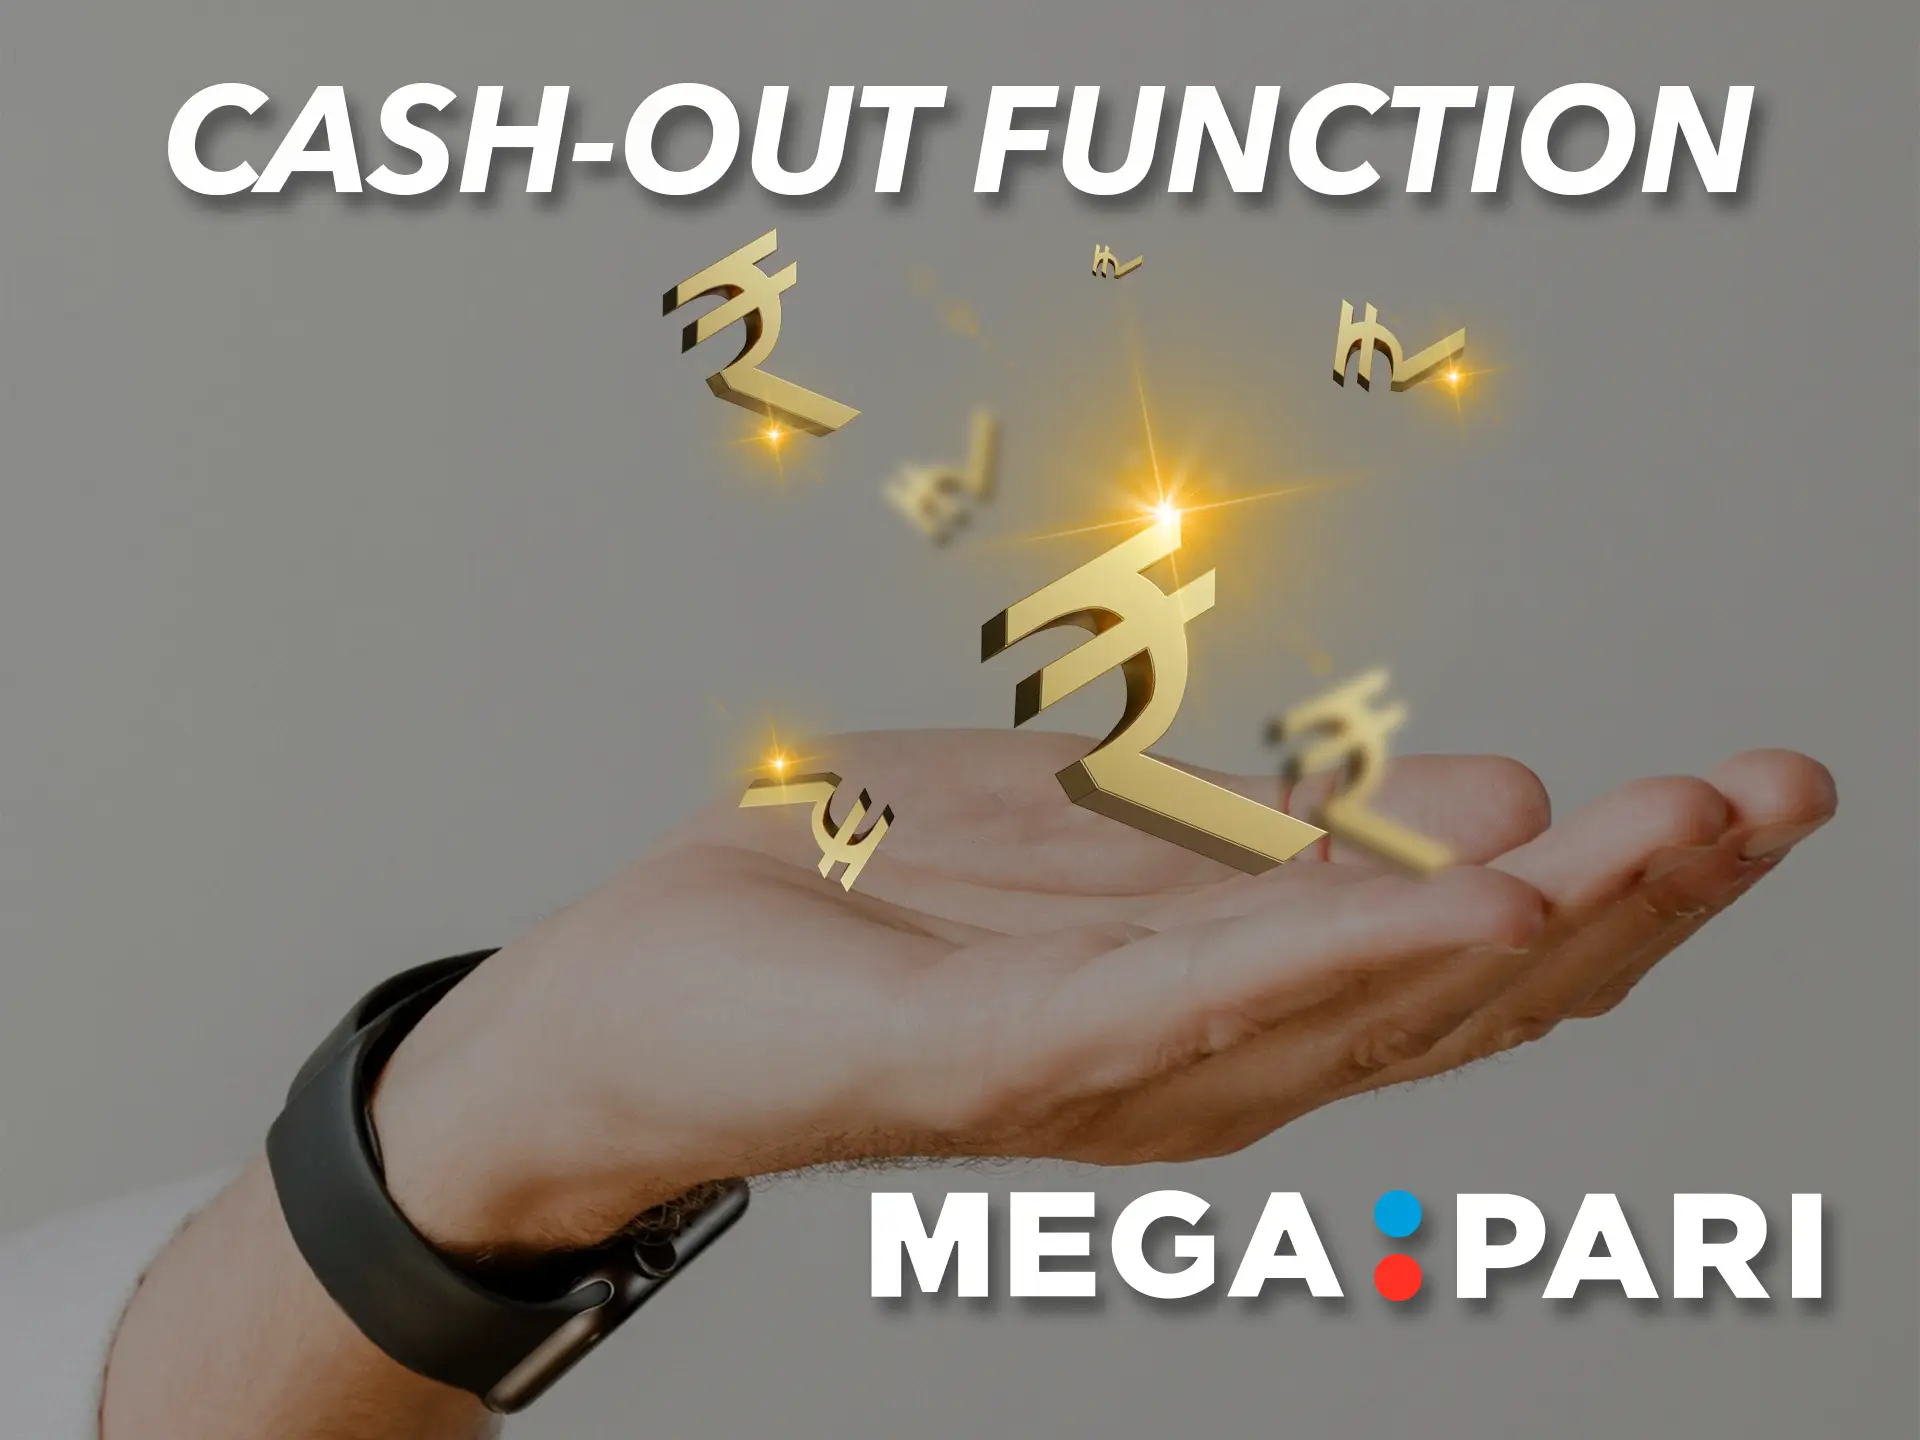 At Megapari you will find fast withdrawals.